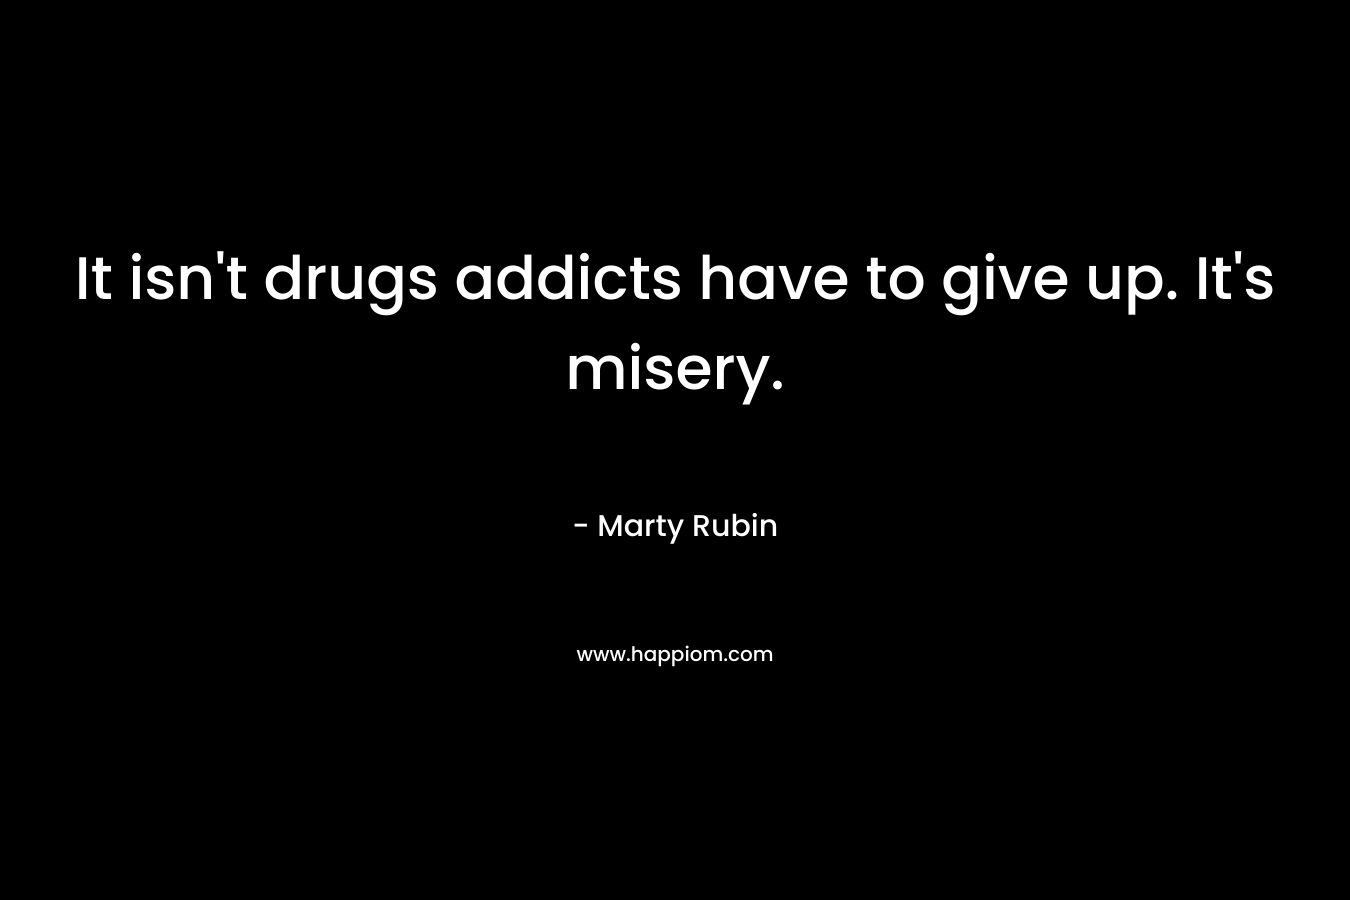 It isn’t drugs addicts have to give up. It’s misery. – Marty Rubin